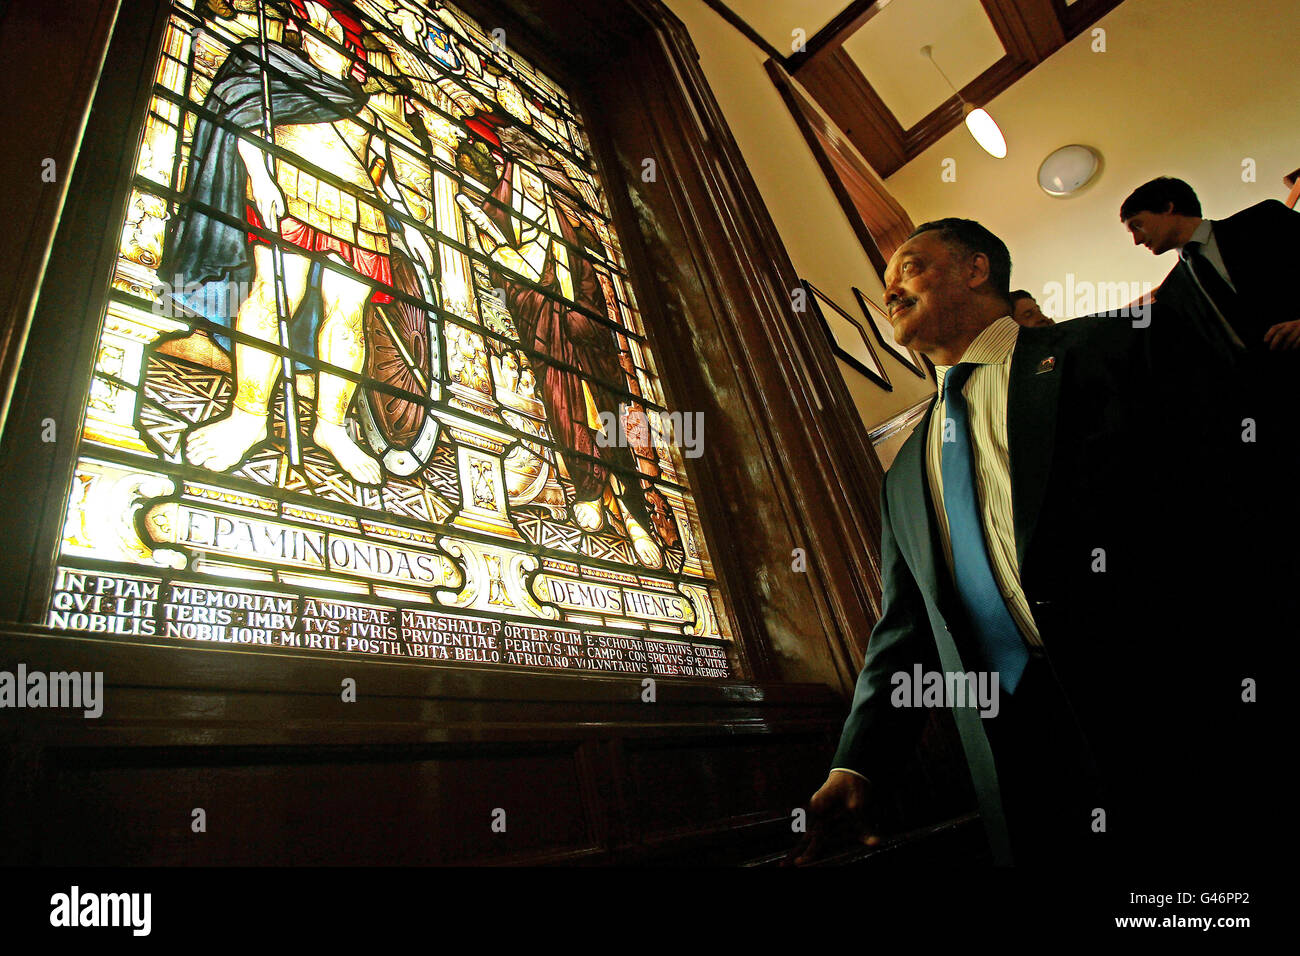 Civil rights campaigner and former presidential candidate Reverend Jesse Jackson looks at stained glass on the stairs in Trinity College on his way to address the College Historical Society, in Trinity College Dublin today. Stock Photo